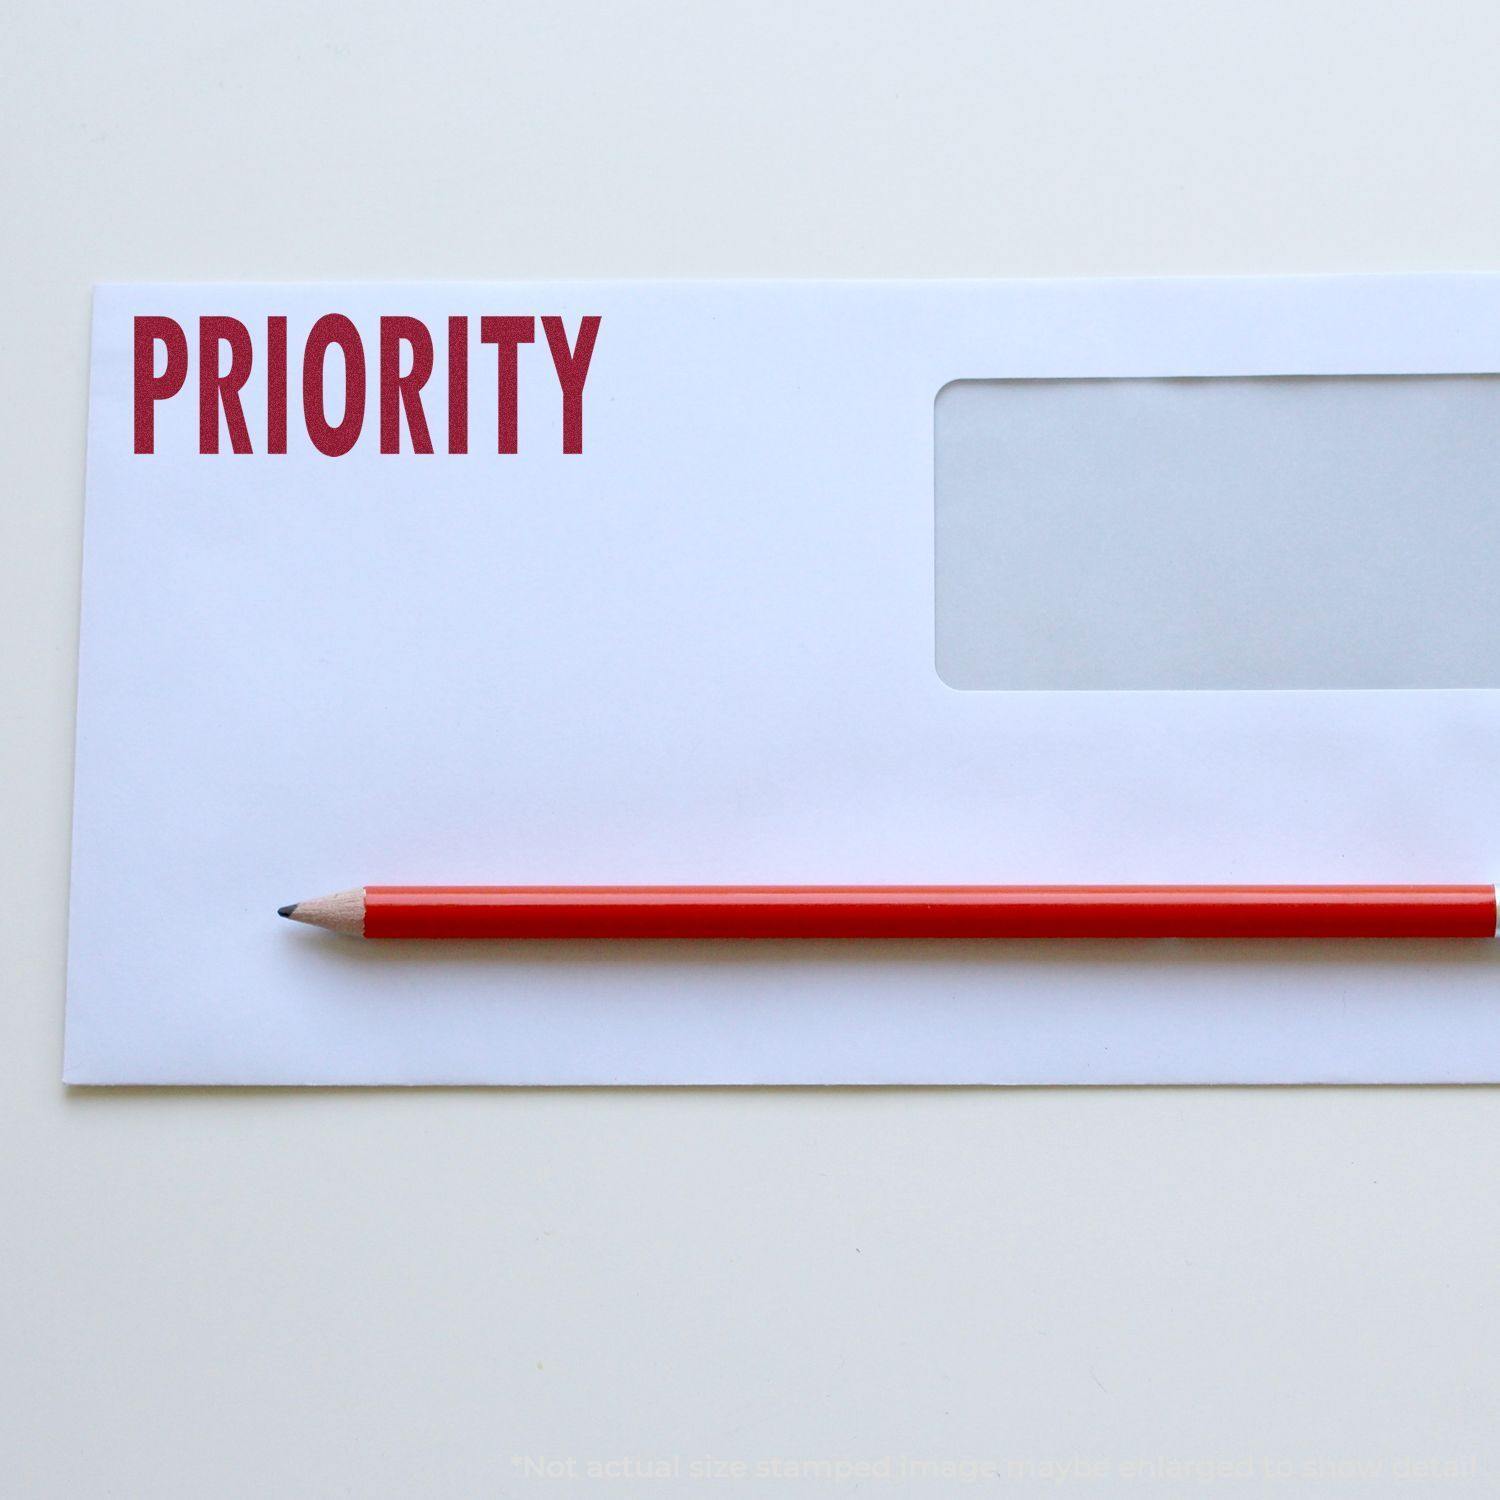 A stock office rubber stamp with a stamped image showing how the text "PRIORITY" in a large font is displayed after stamping.